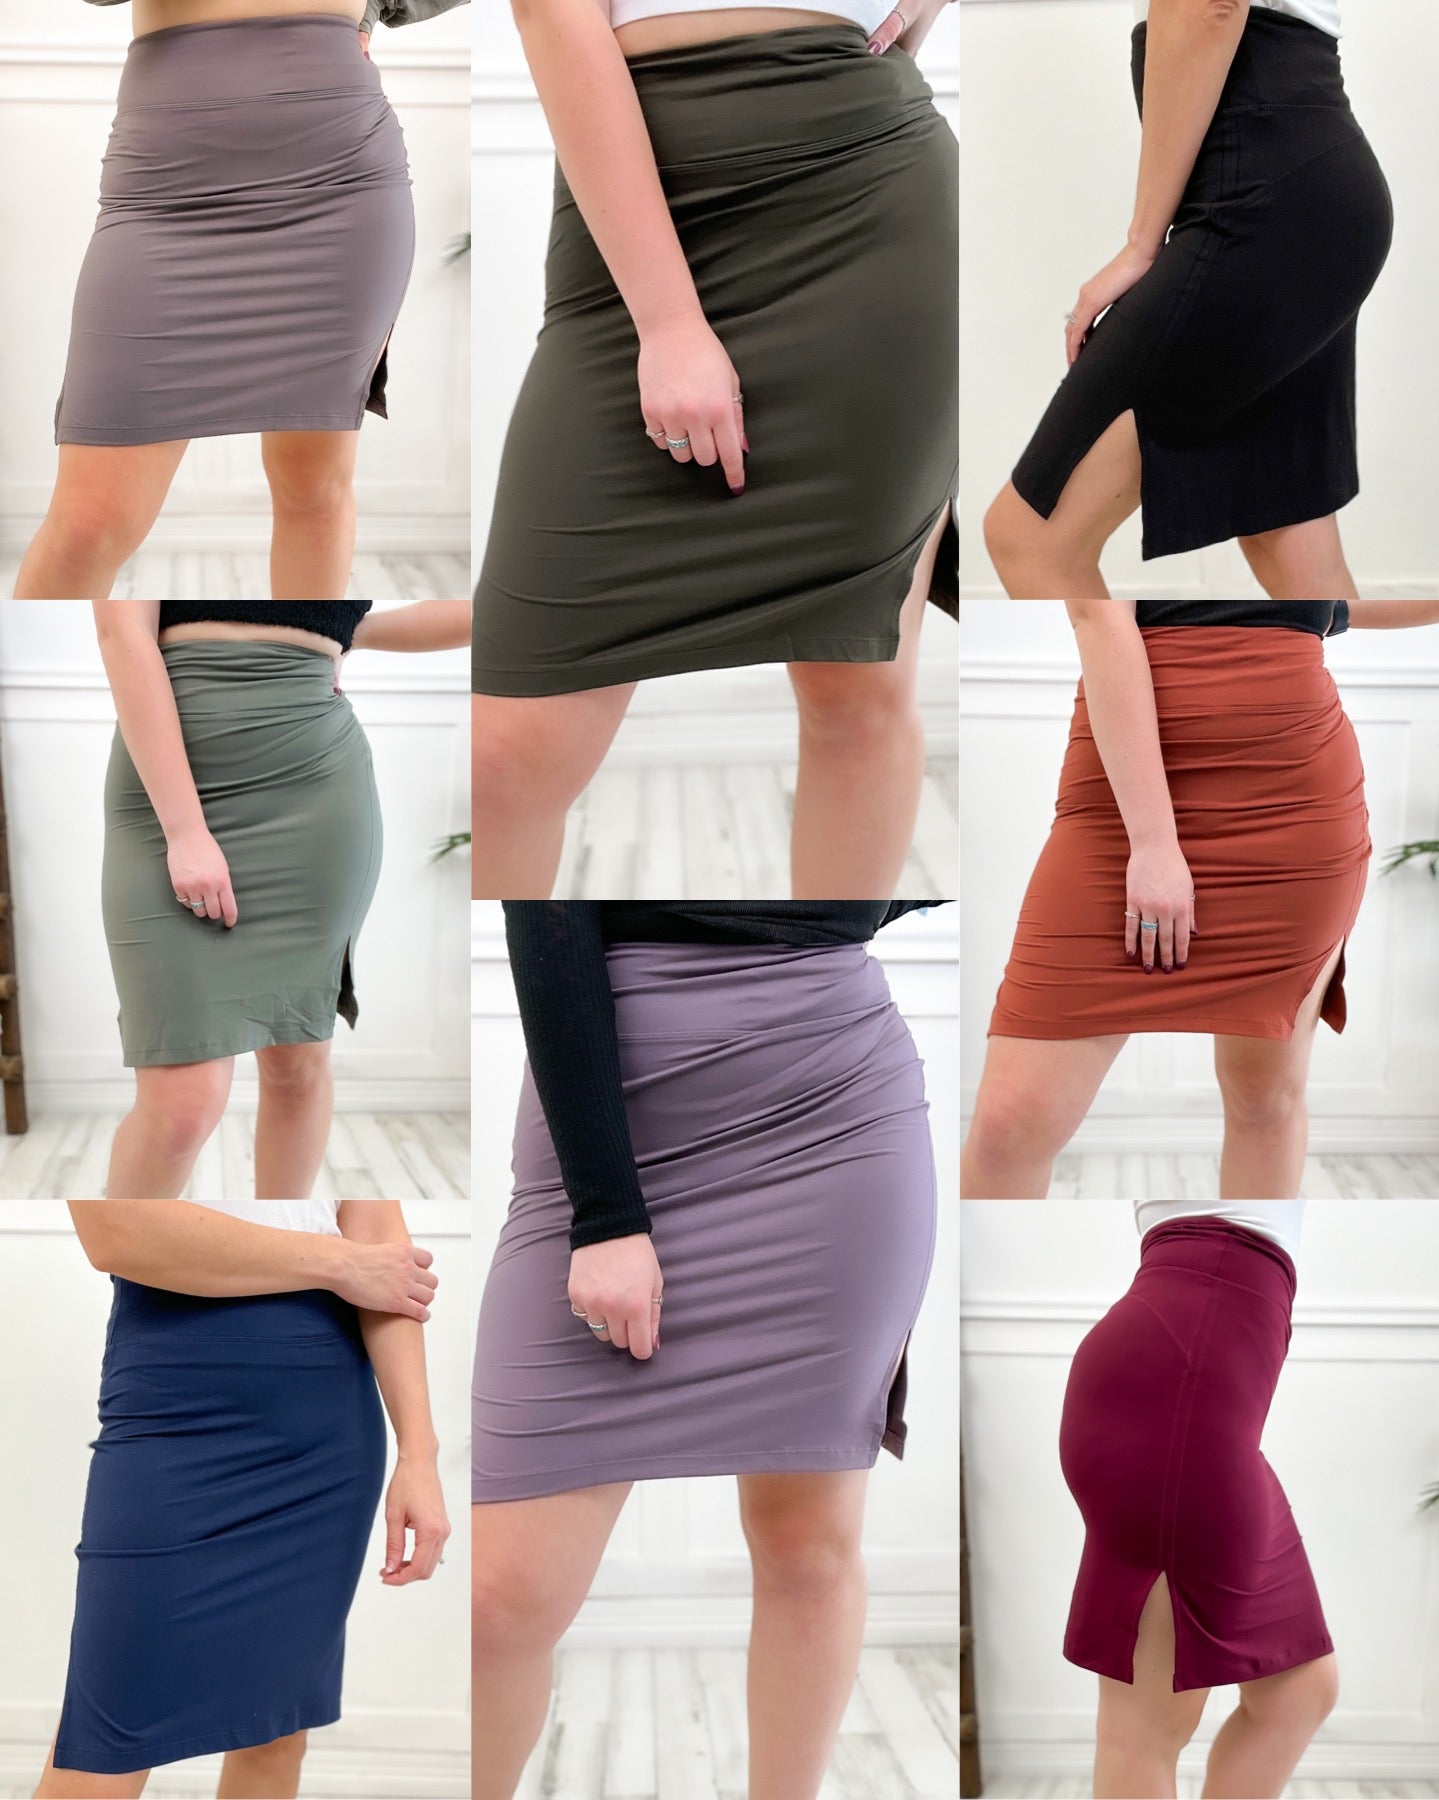 Only $12.99!! High Waist Pencil Skirt with Side Slit